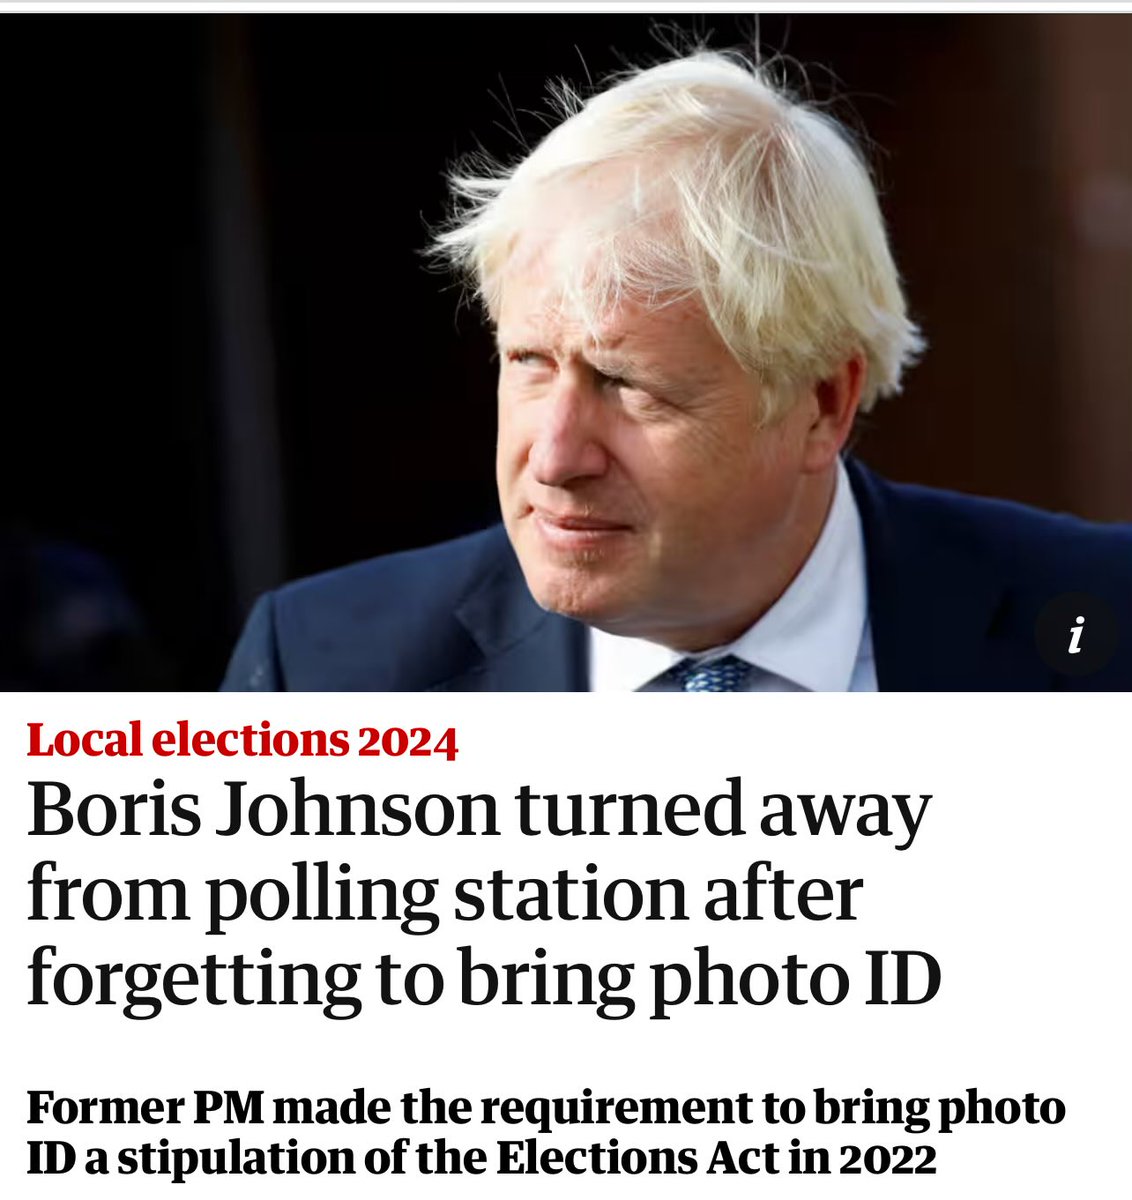 Man who makes it law to require photo ID in order to vote…forgets ID. Can’t vote…I mean…😂 #LocalElections #vote